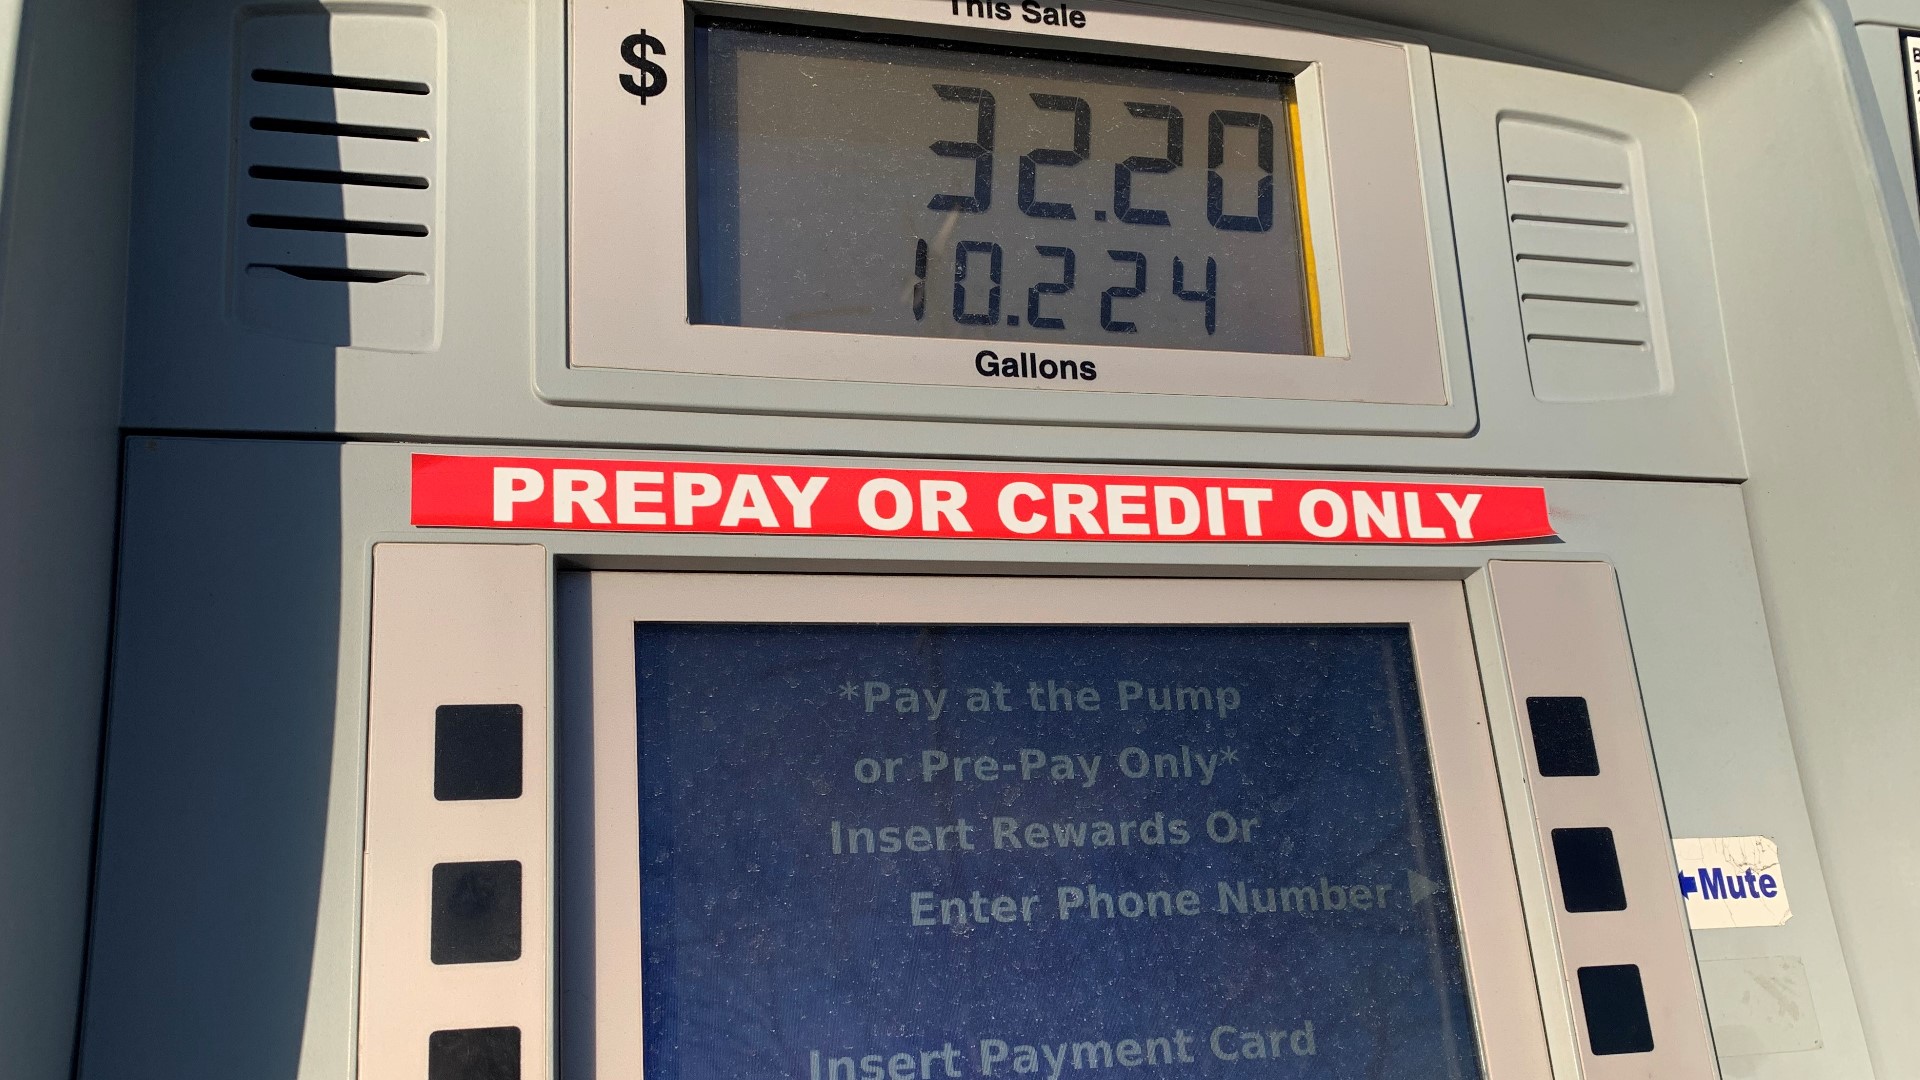 Effective January 3, 2022, all stores’ fuel pumps will be turned to prepay inside or pay-at-the-pump only.